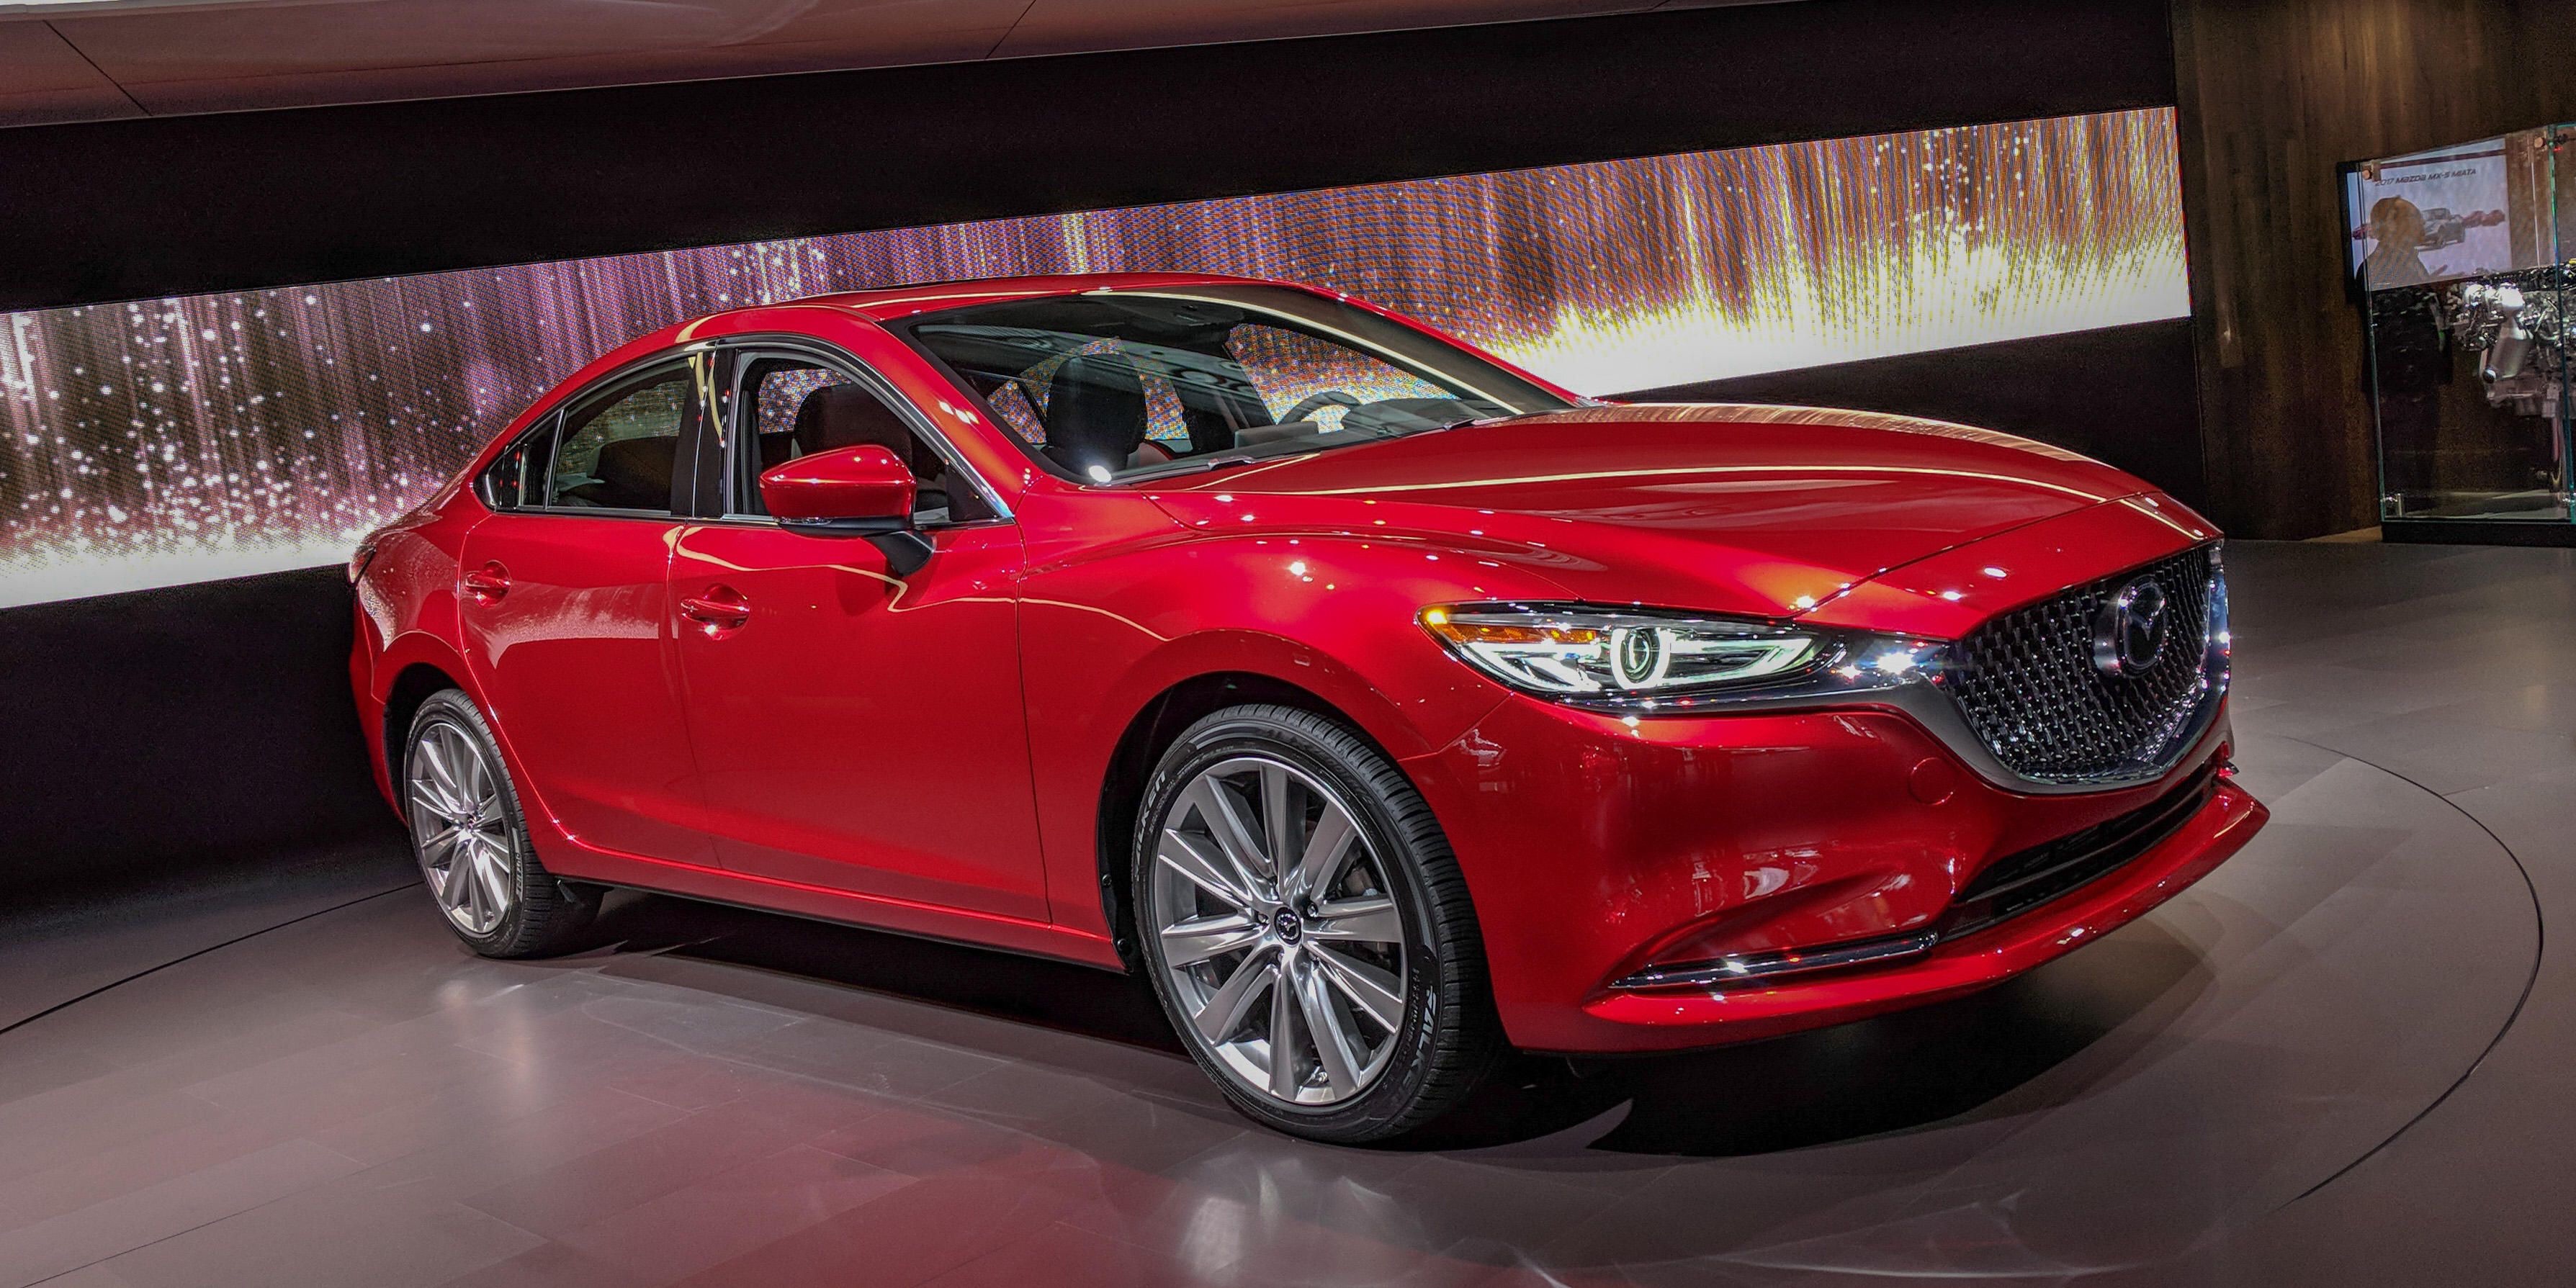 2018 Mazda6 receives some nice upgrades for not a lot more money